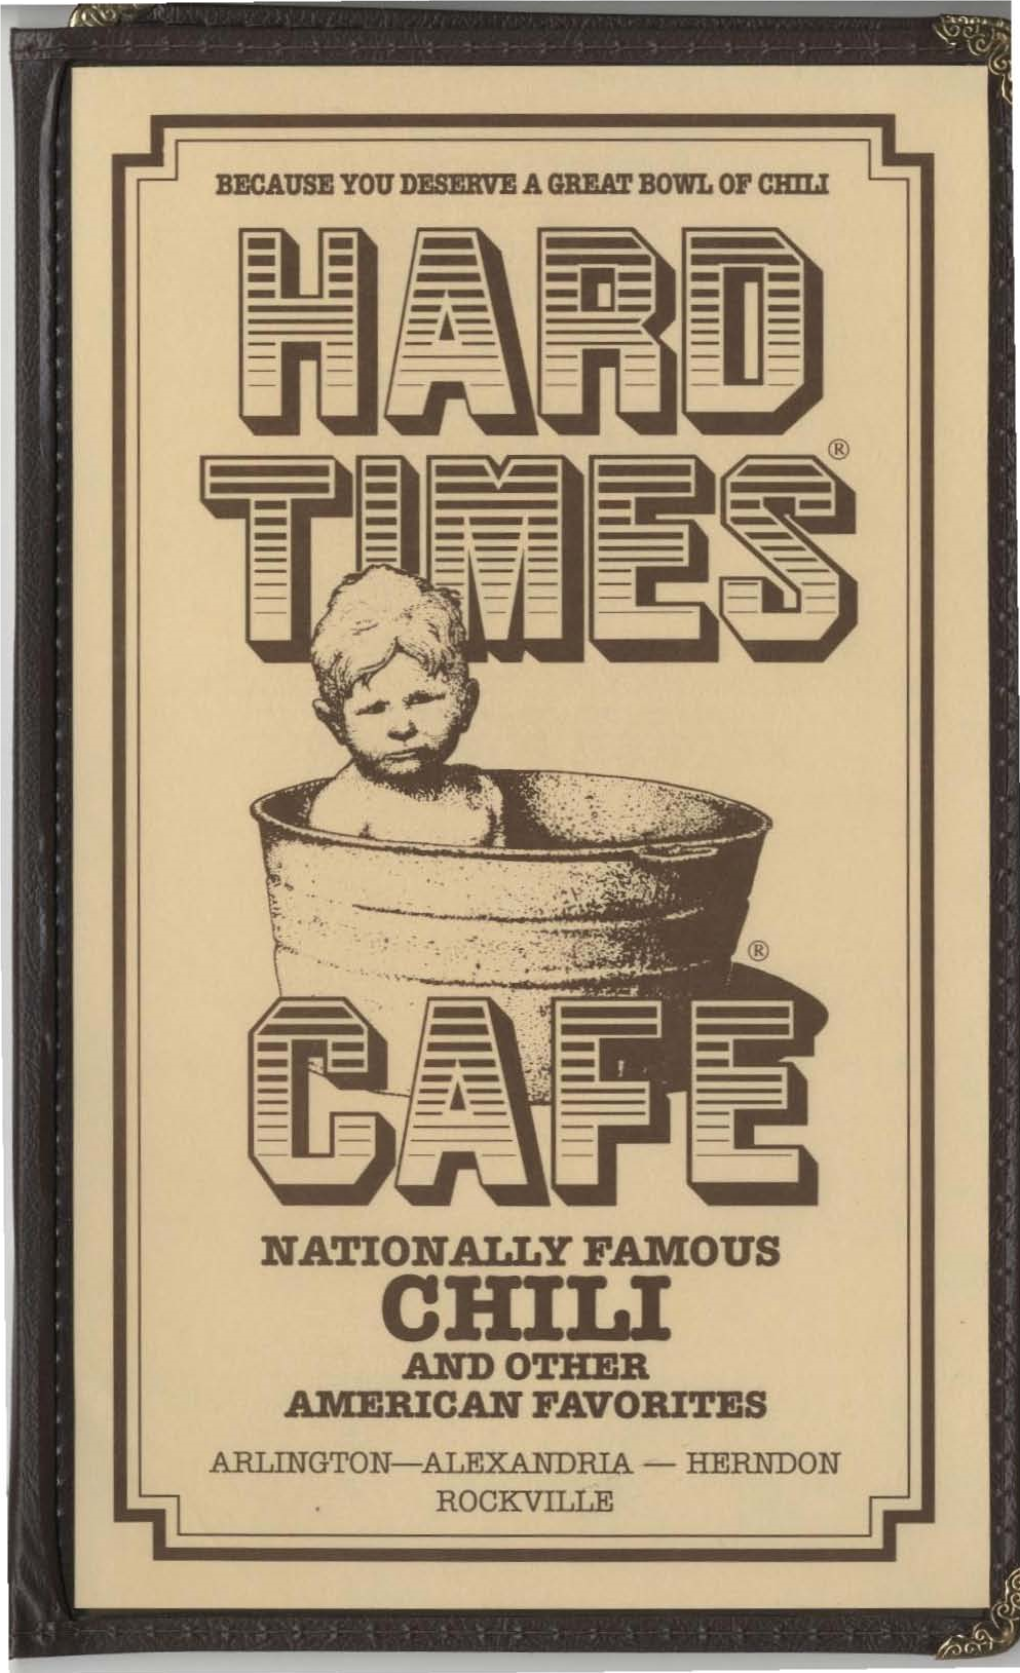 HARD TIMES CAFE "One of the Country's Most-Lauded Chijl Spots" Budweiser